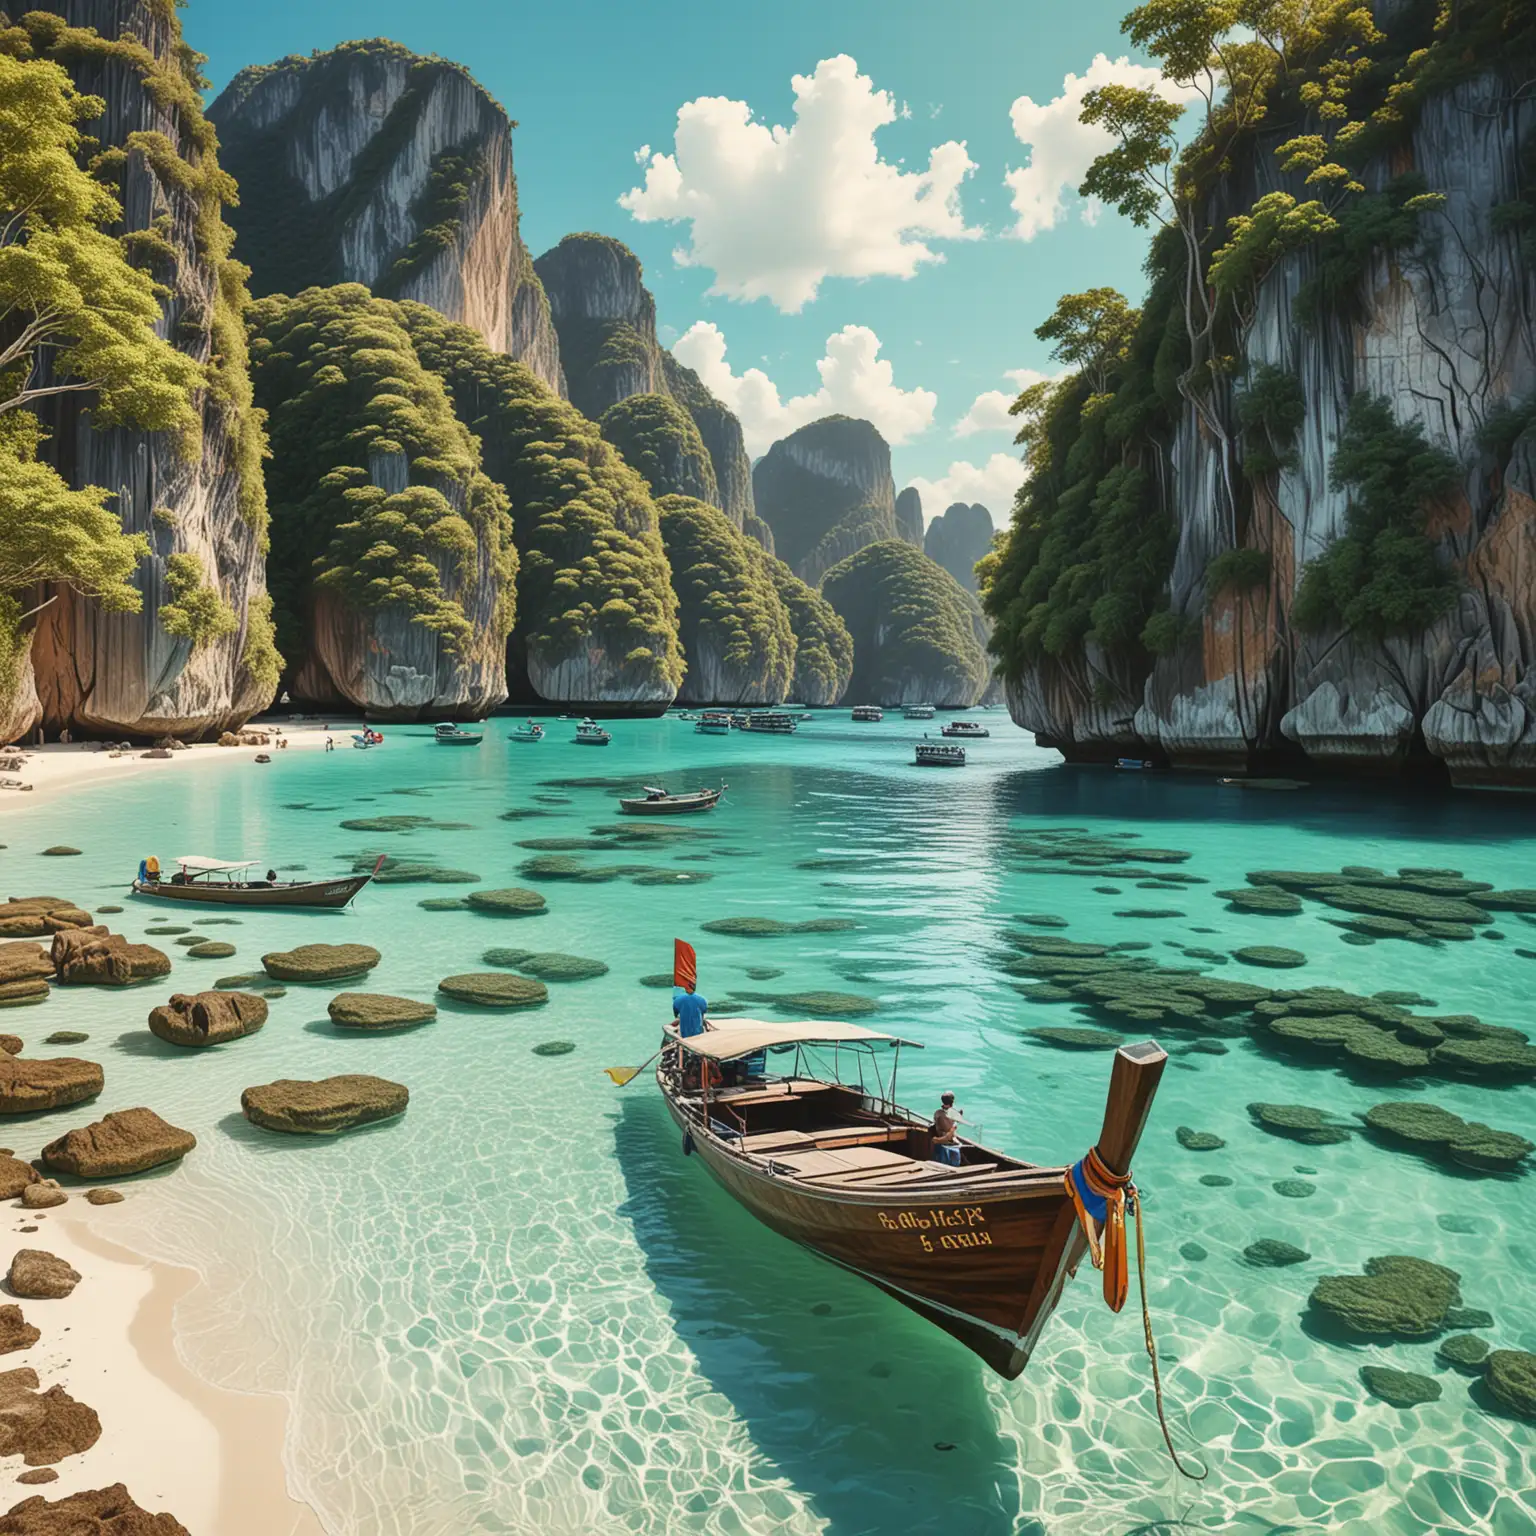 illustration, neural style transfer, background: The Phi Phi Islands: The Phi Phi Islands, consisting of Phi Phi Don and Phi Phi Leh, are famous for their spectacular coastal landscapes and crystal-clear waters. High limestone cliffs rise steeply from the turquoise sea, forming an impressive backdrop to white sandy beaches and lush jungles. Boat trips to secluded coves and snorkeling trips along the coral reefs provide unforgettable insights into the beauty of this island group.